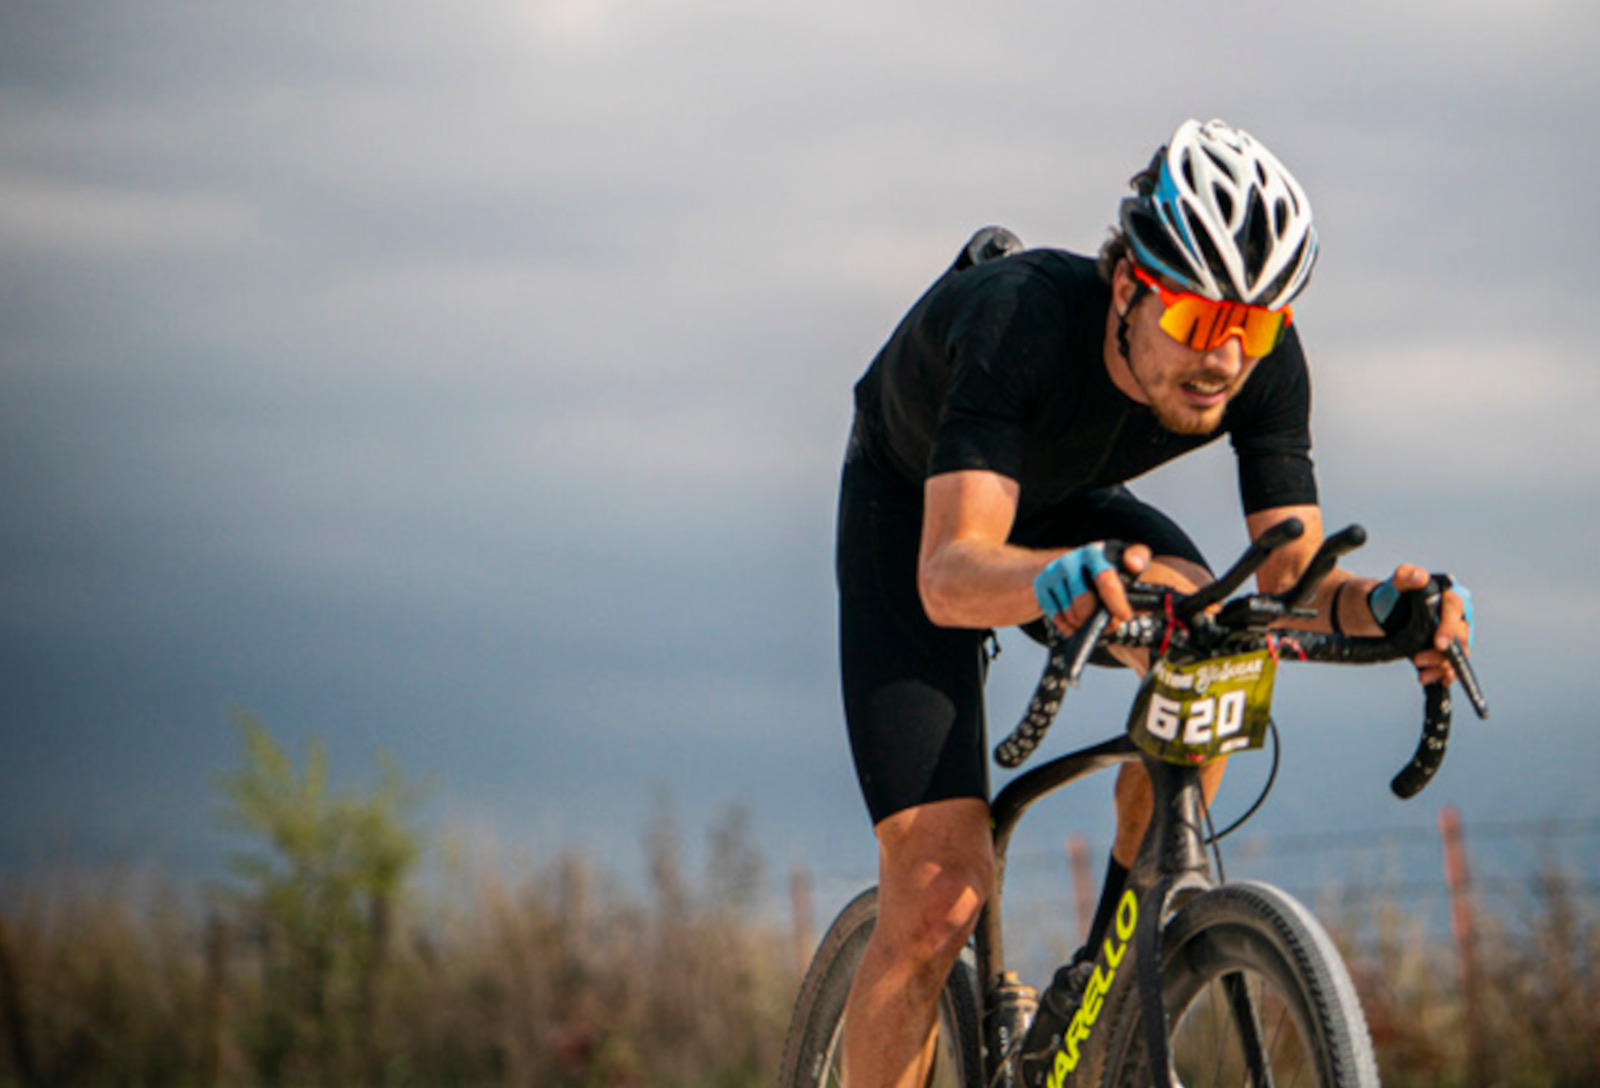 Adam Roberge third at Mid South Gravel Canadian Cycling Magazine